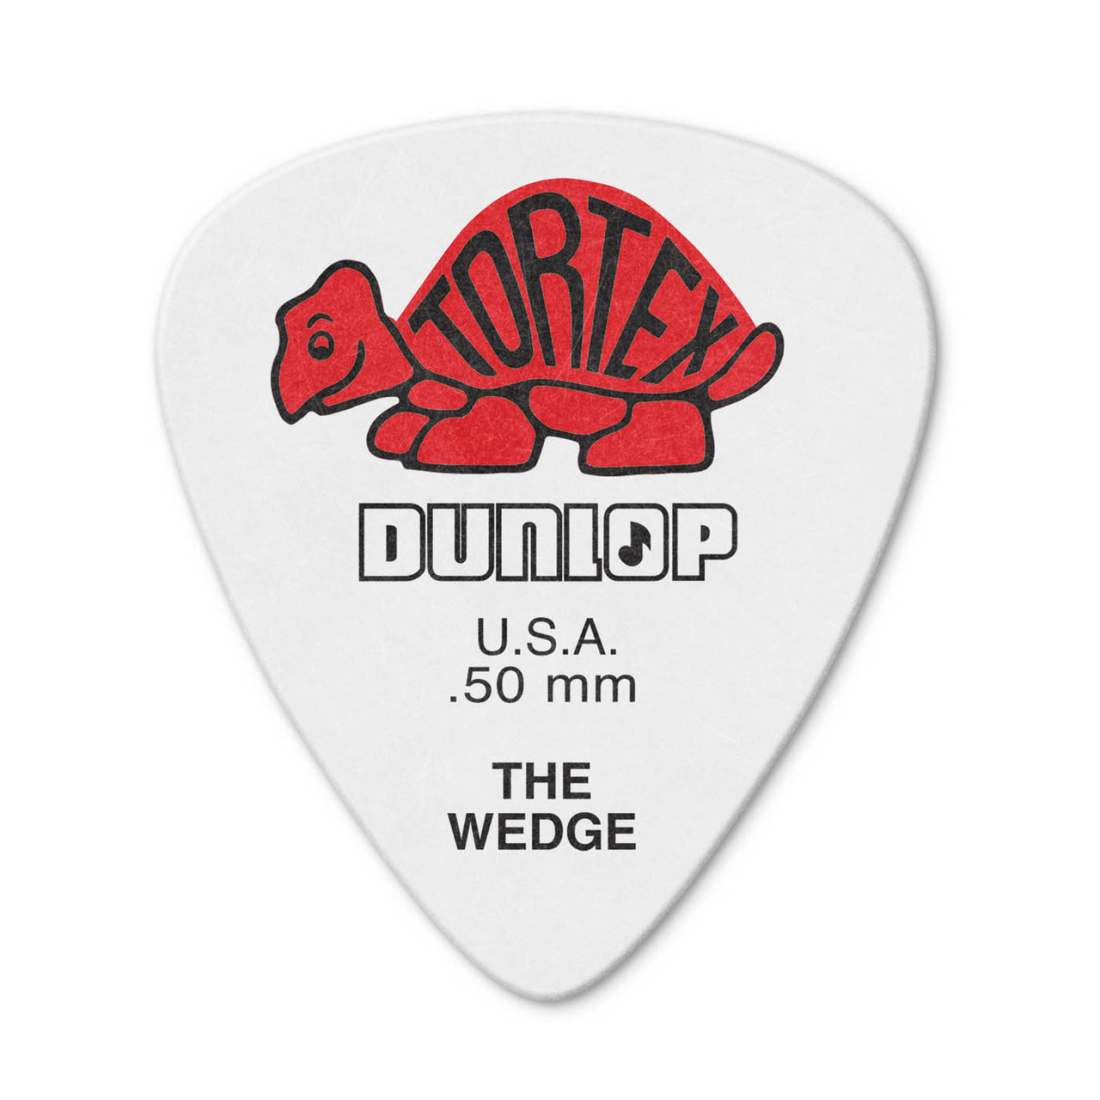 Tortex Wedge Players Pack (72 Pack) - .50mm